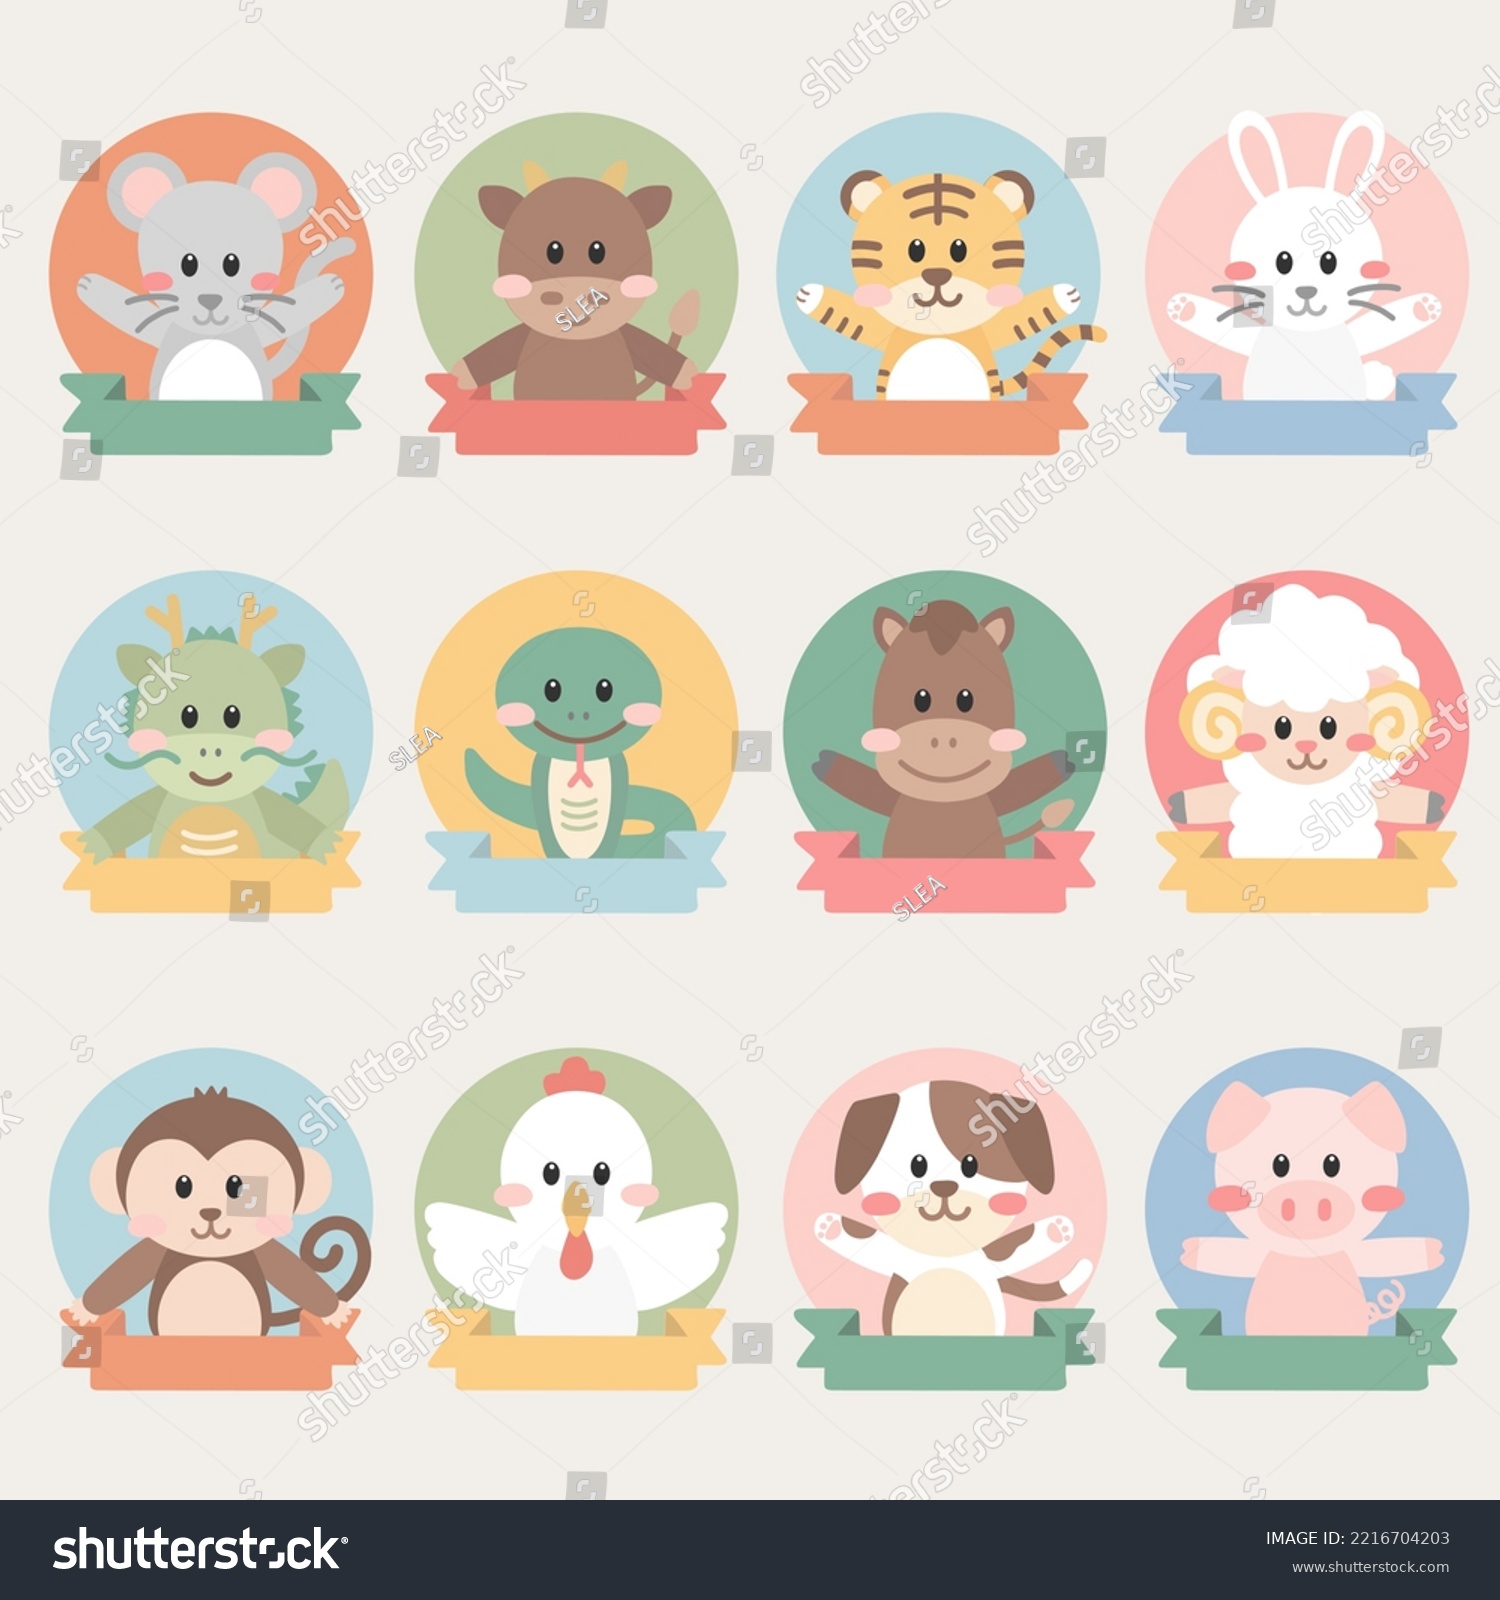 SVG of Chinese traditional 12 zodiac animals illustration vector set. svg